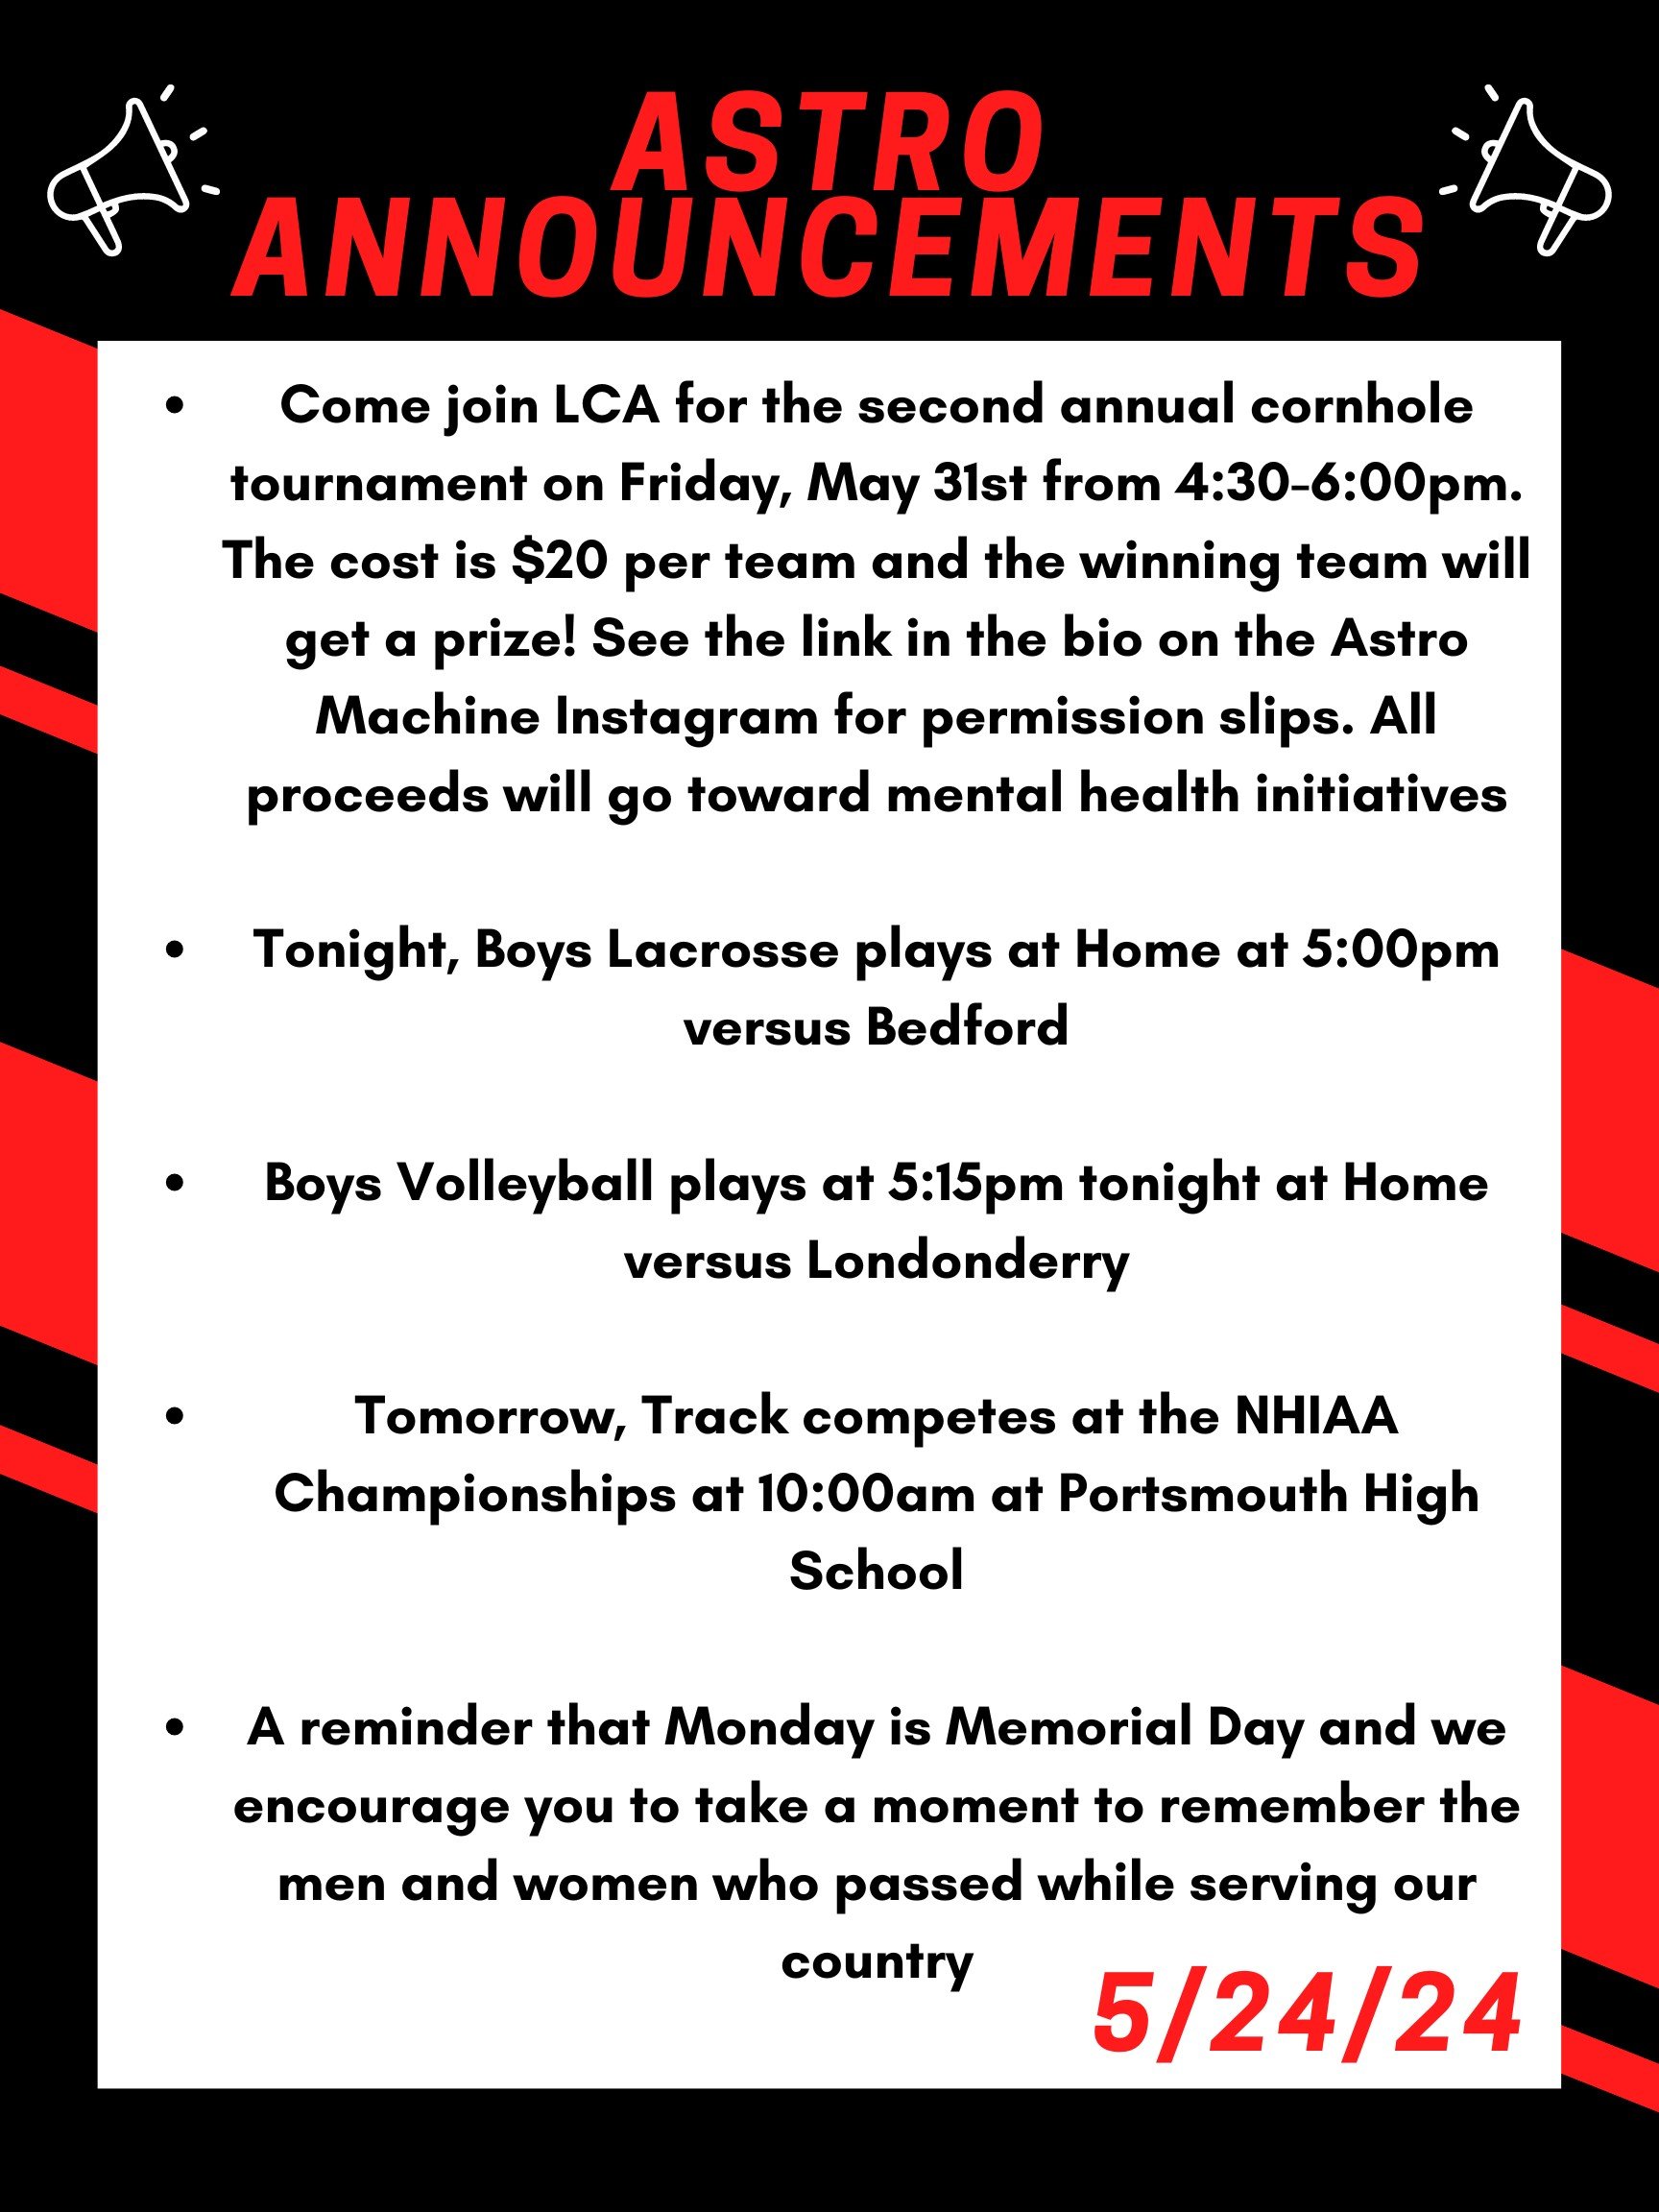 Good morning Astros! Here are this week’s announcements for athletics and clubs!   Come join LCA for the second annual cornhole tournament on Friday, May 31st from 4:30 to 6:00pm. The cost is $20 per team and the winning team will get a prize! See the link in the bio on the Astro Machine Instagram for permission slips. All proceeds will go toward mental health initiatives.  Tonight, boys lacrosse plays at home at 5:00 versus Bedford  Boys volleyball plays at 5:15 tonight at home versus Londonderry.   Tomorrow, track competes at the NHIAA championships at 10:00 am at Portsmouth high school.   A reminder that Monday is memorial day and we encourage you to take a moment to remember the men and women who passed while serving our country.   Thanks for listening Astros and have a great weekend! 